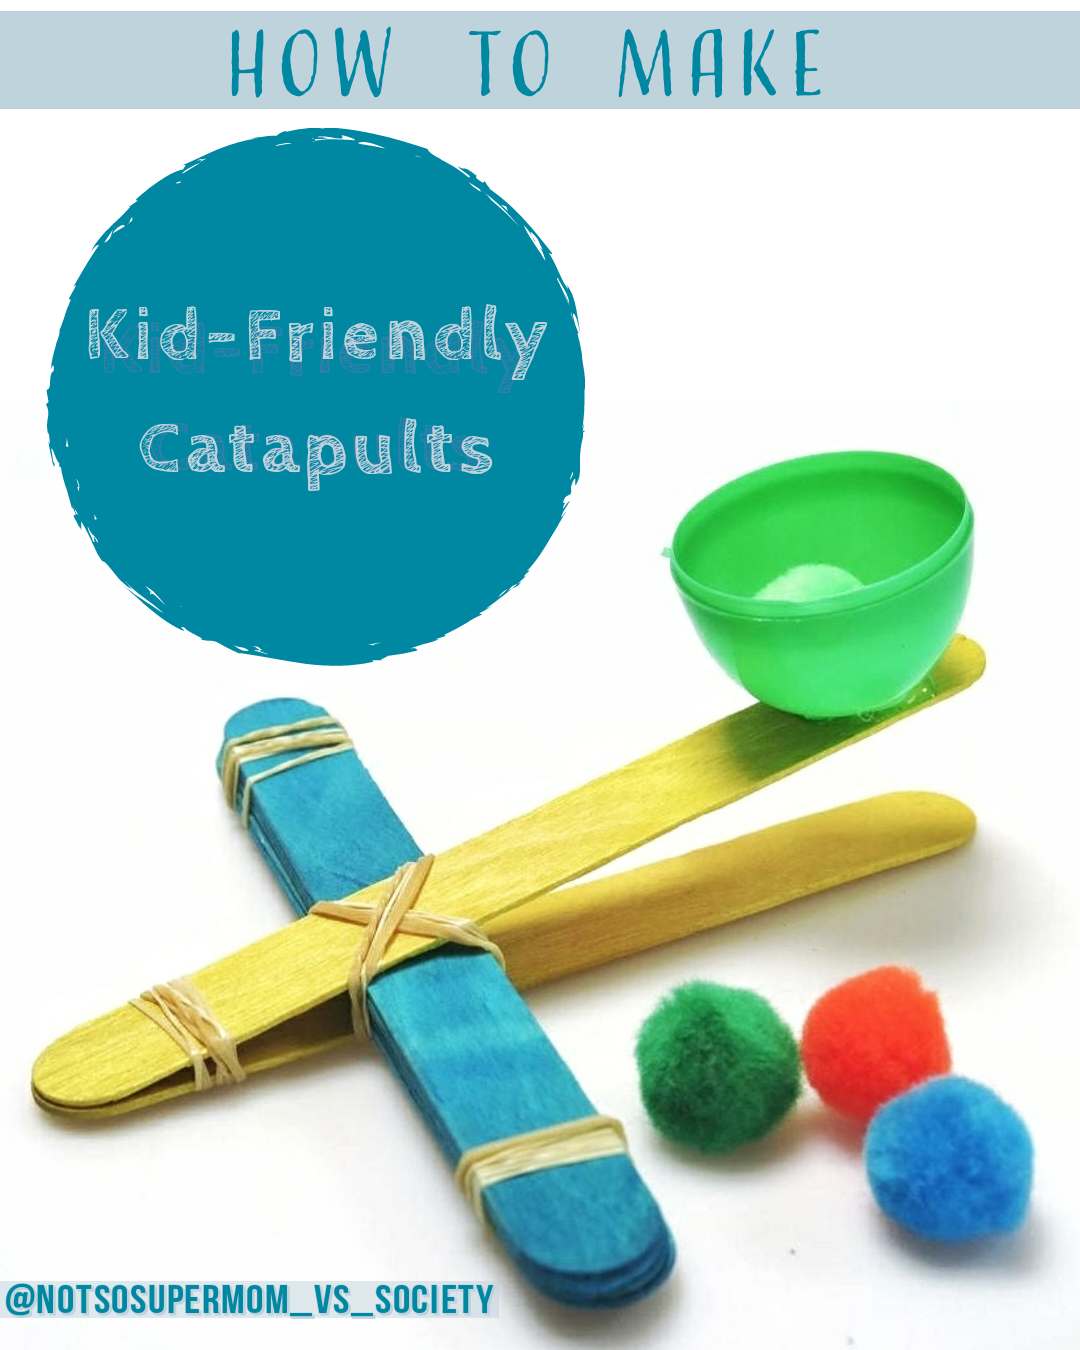 How to Make a Simple Popsicle Stick Catapult (3 Catapult Designs